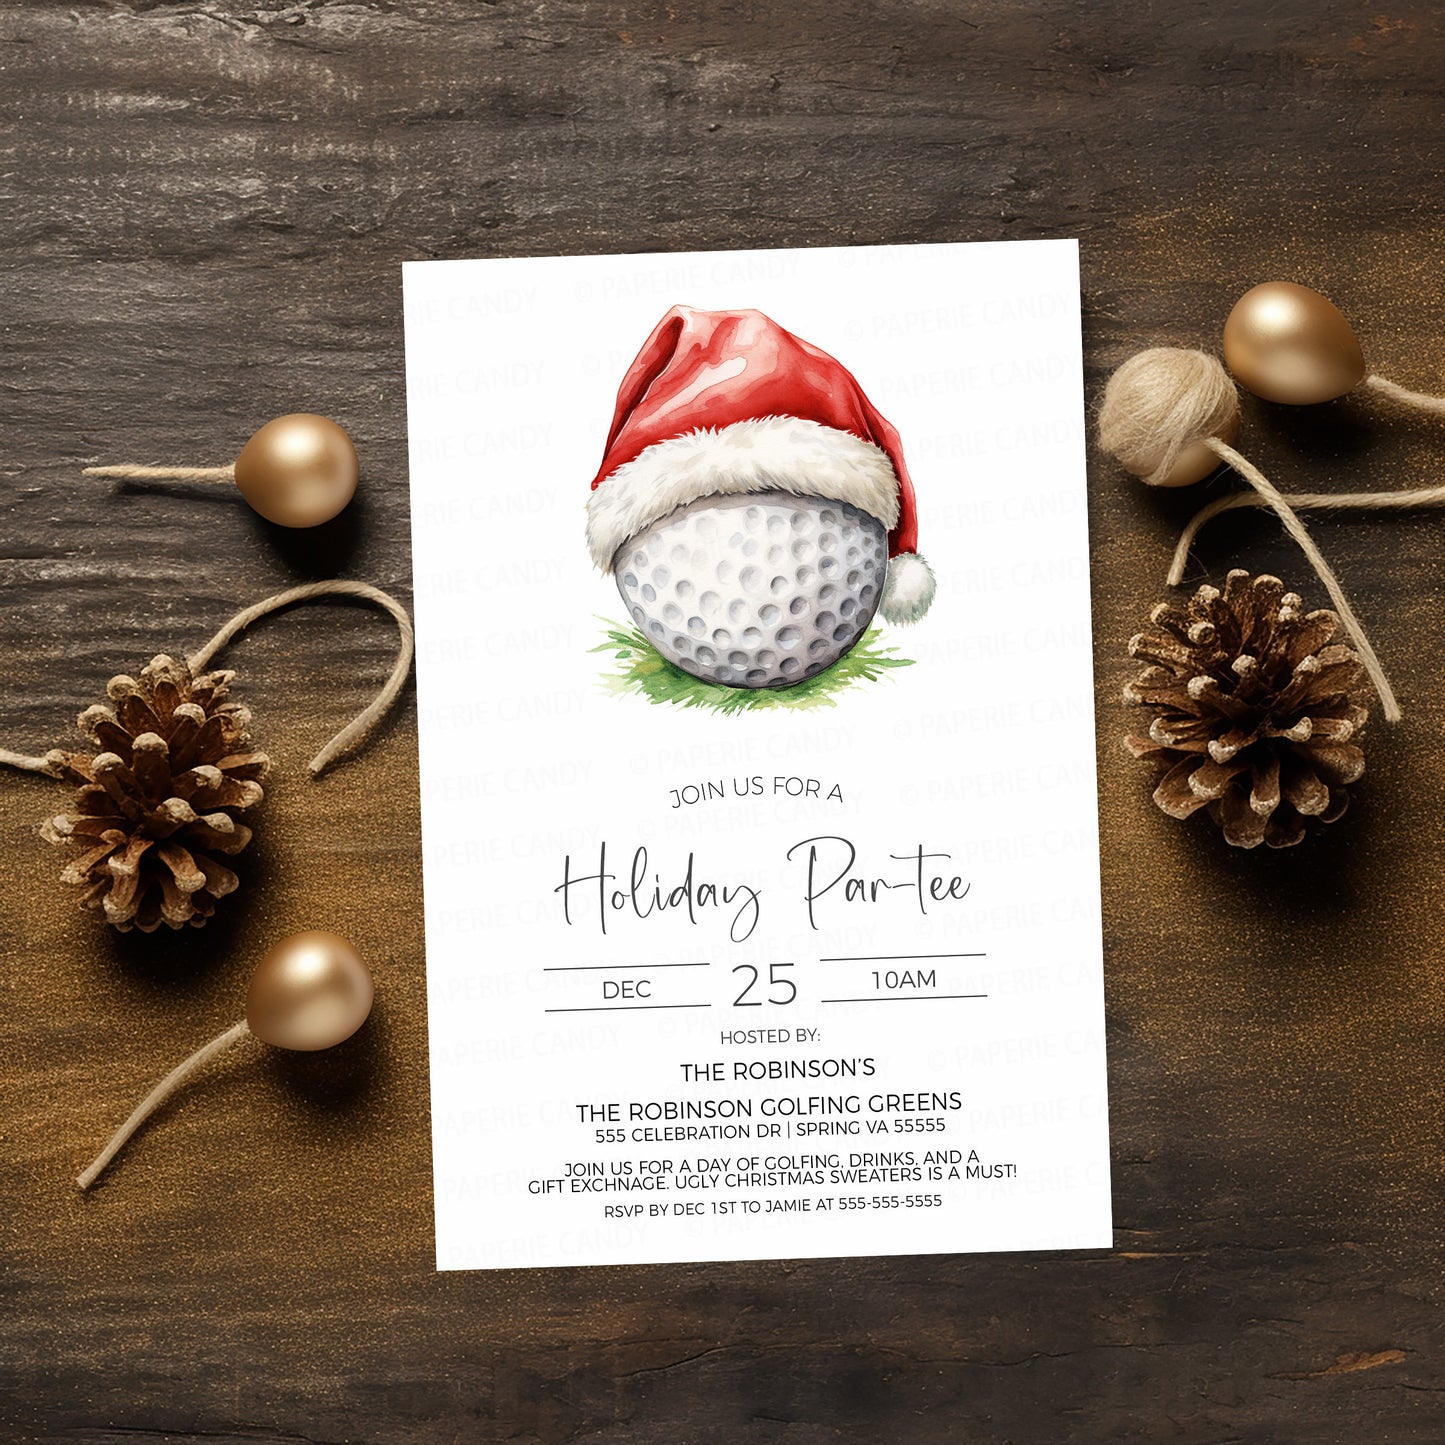 Christmas Golf Invitation, Winter Holiday Golfing Par-tee Invite, Golf Company Party, Golf Ugly Sweater Party, Editable Printable Template